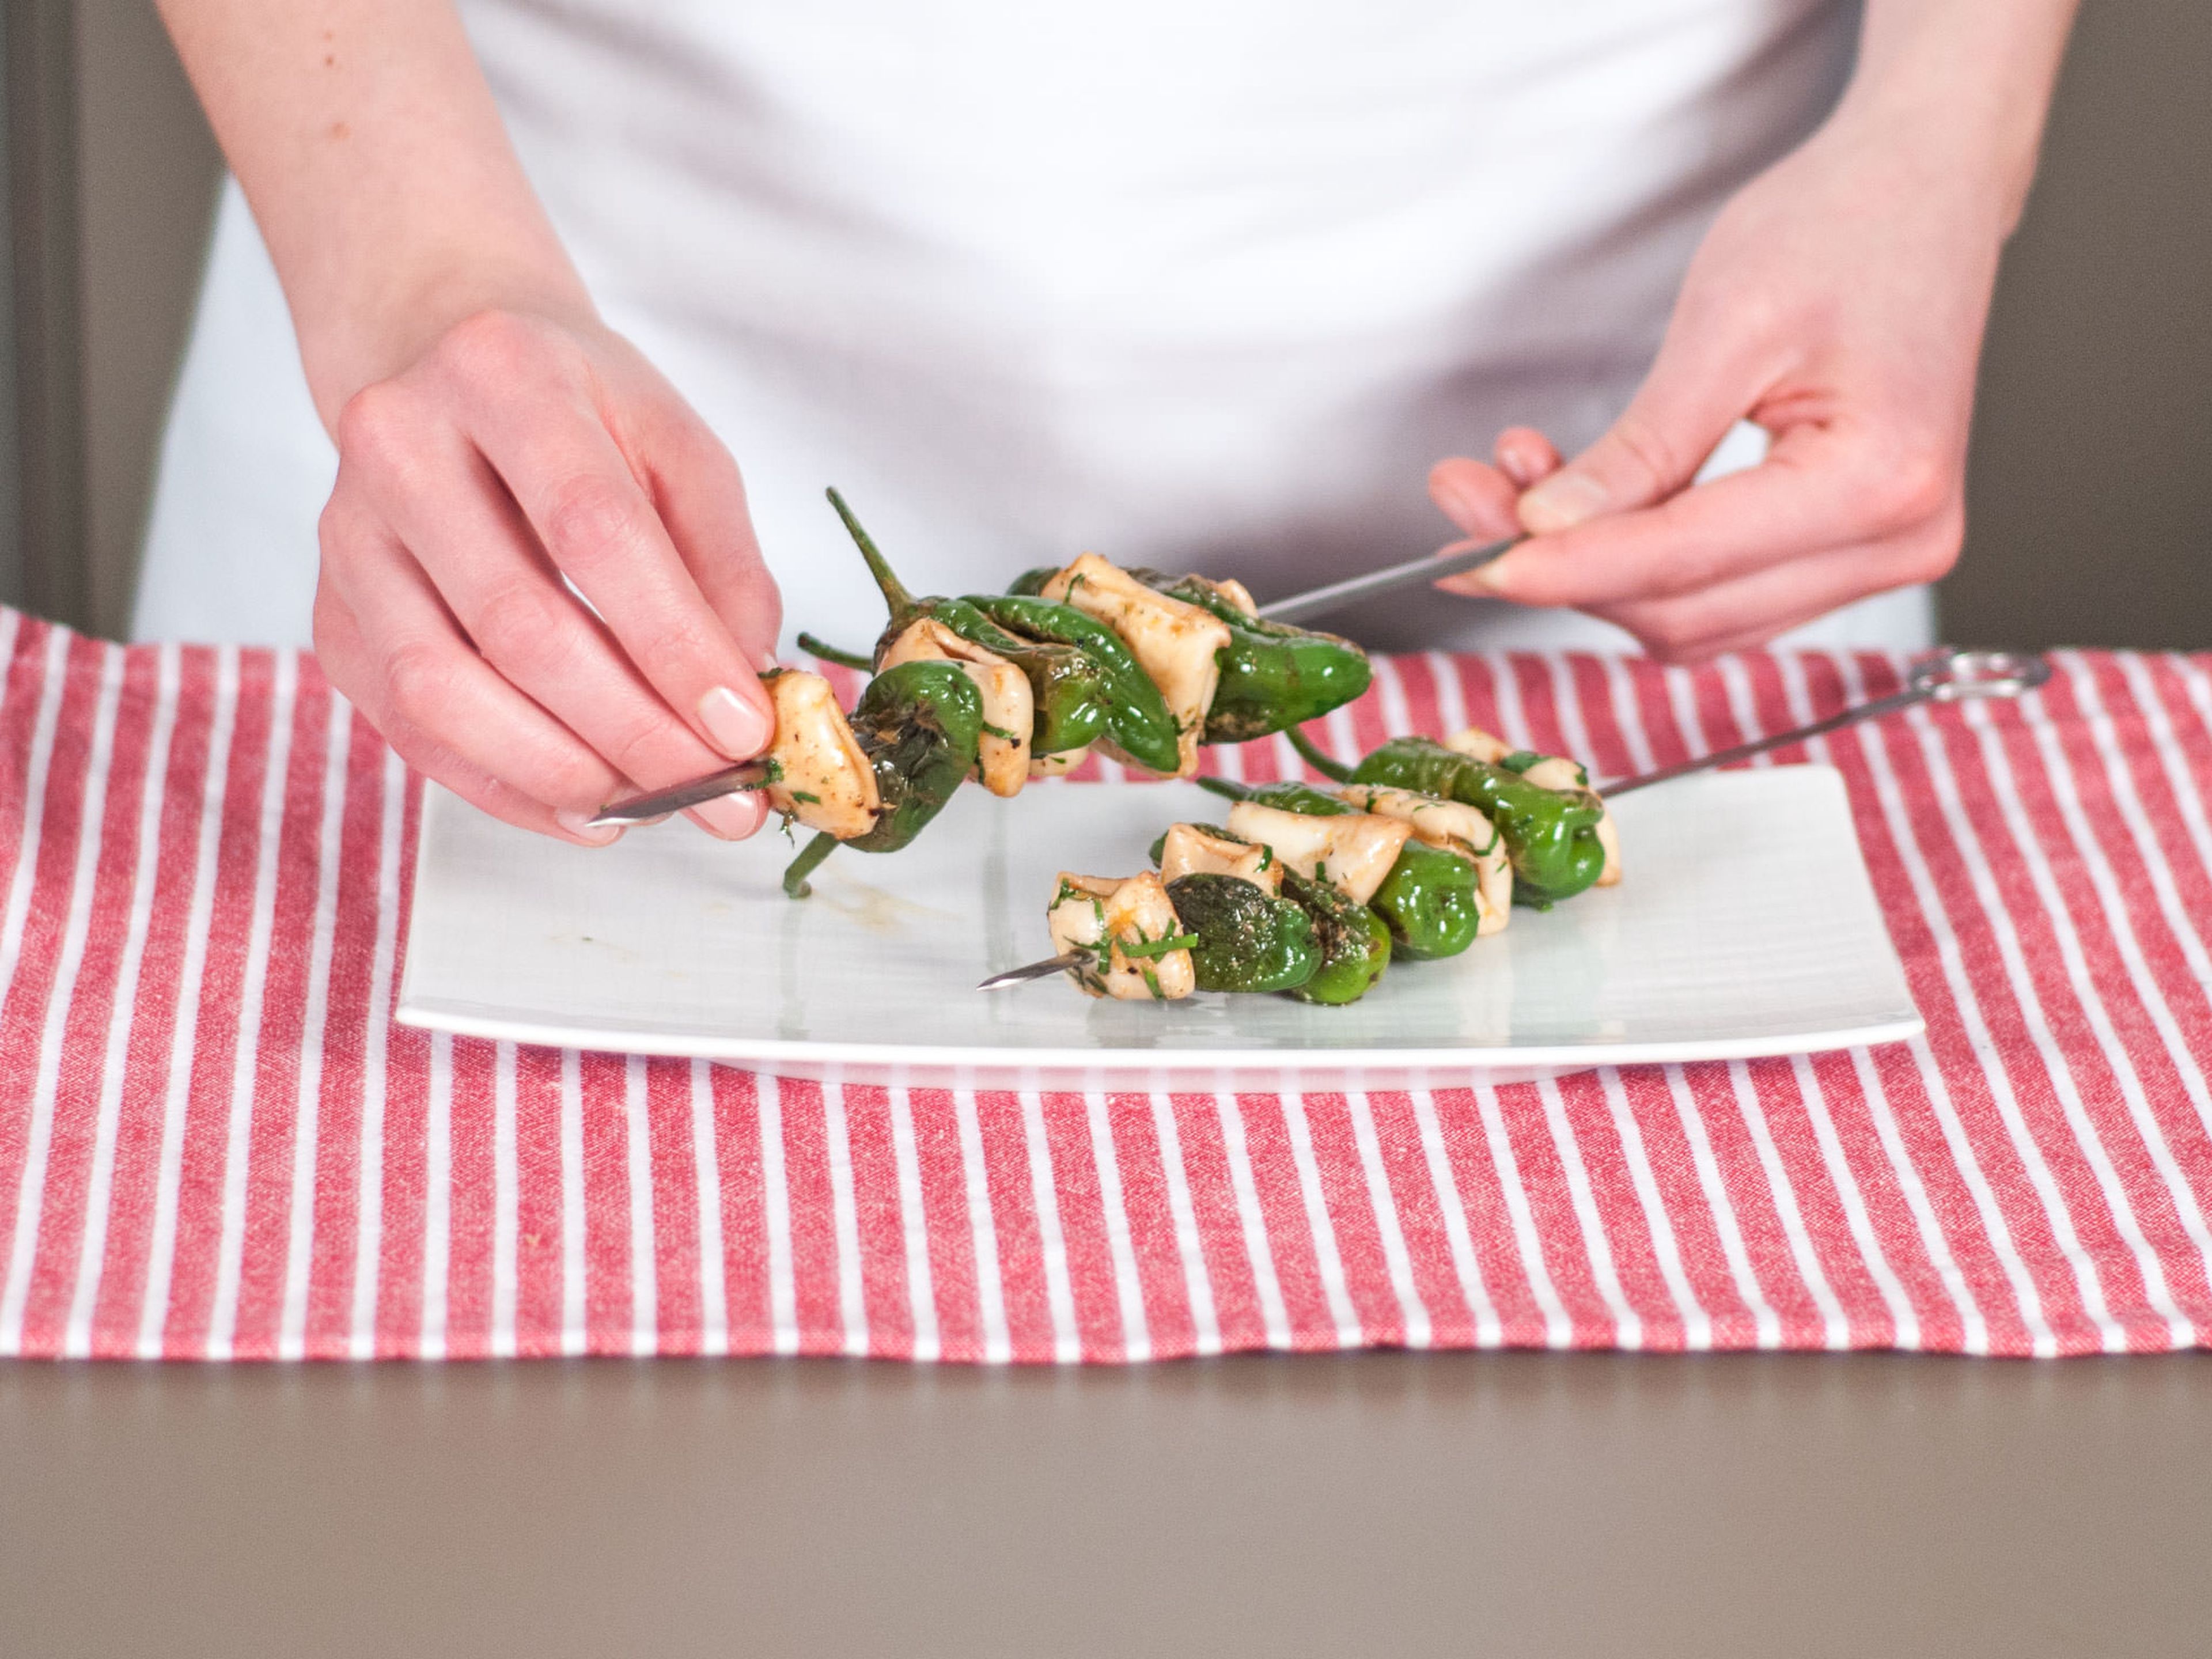 Assemble on skewers, alternating peppers with calamari for a nice presentation. Enjoy with guacamole and aioli!